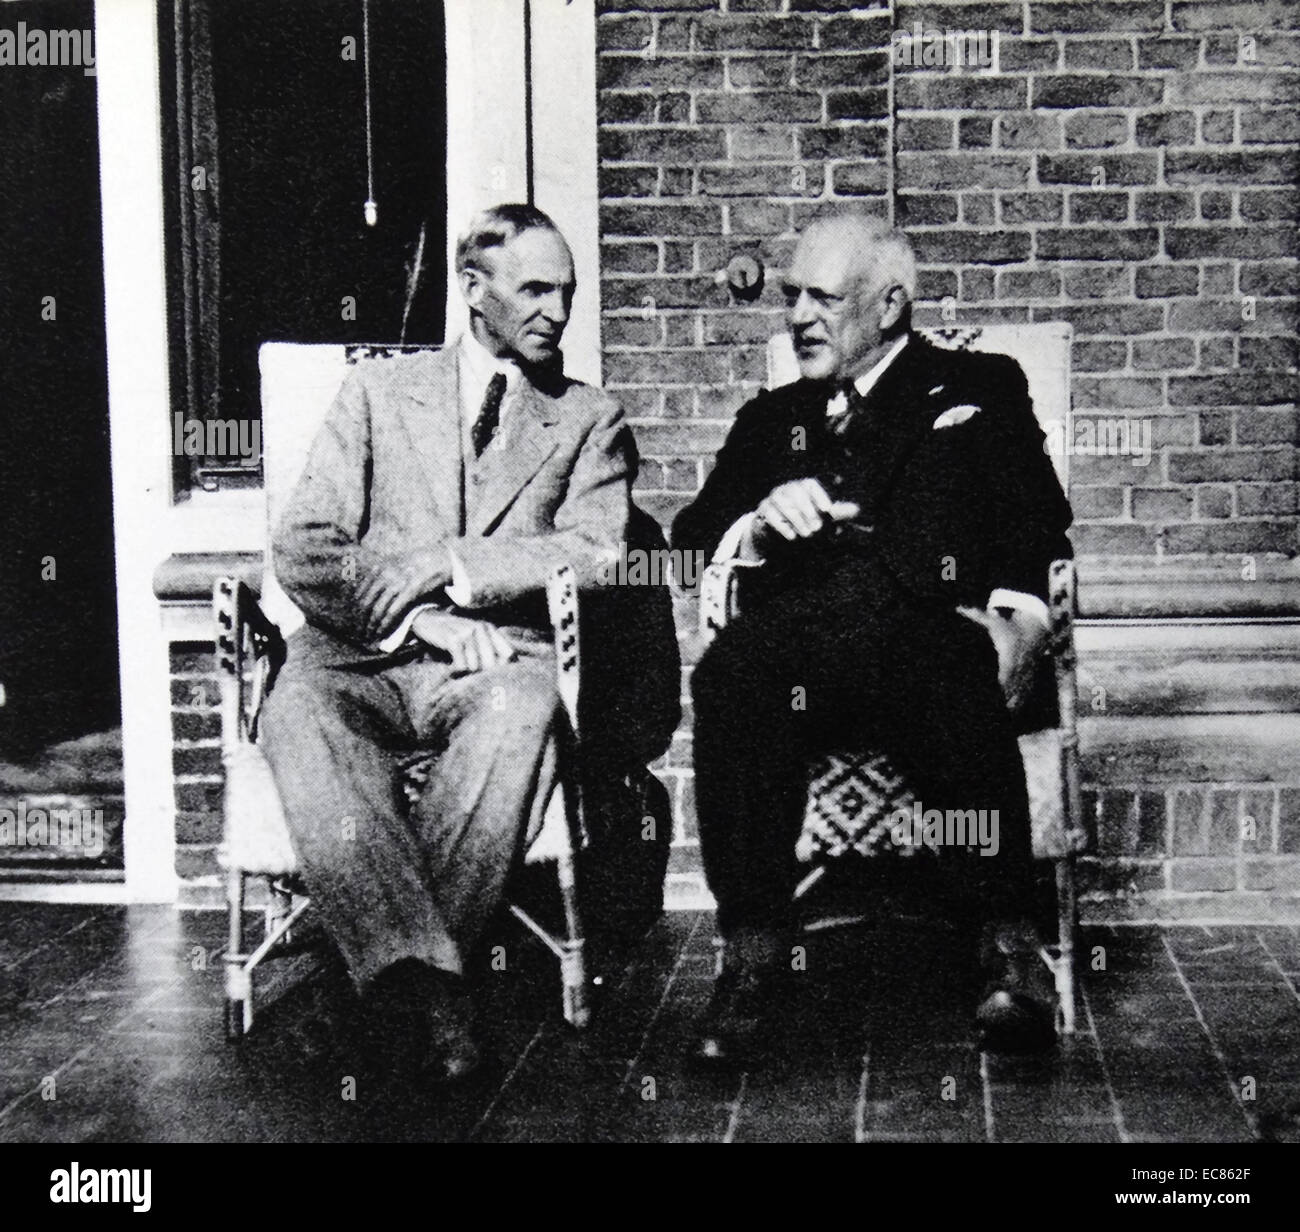 Henry Ford with Anton Philips. Anton Frederik Philips (14 March 1874 – 7 October 1951) co-founded Royal Philips Electronics N.V. in 1912 Stock Photo